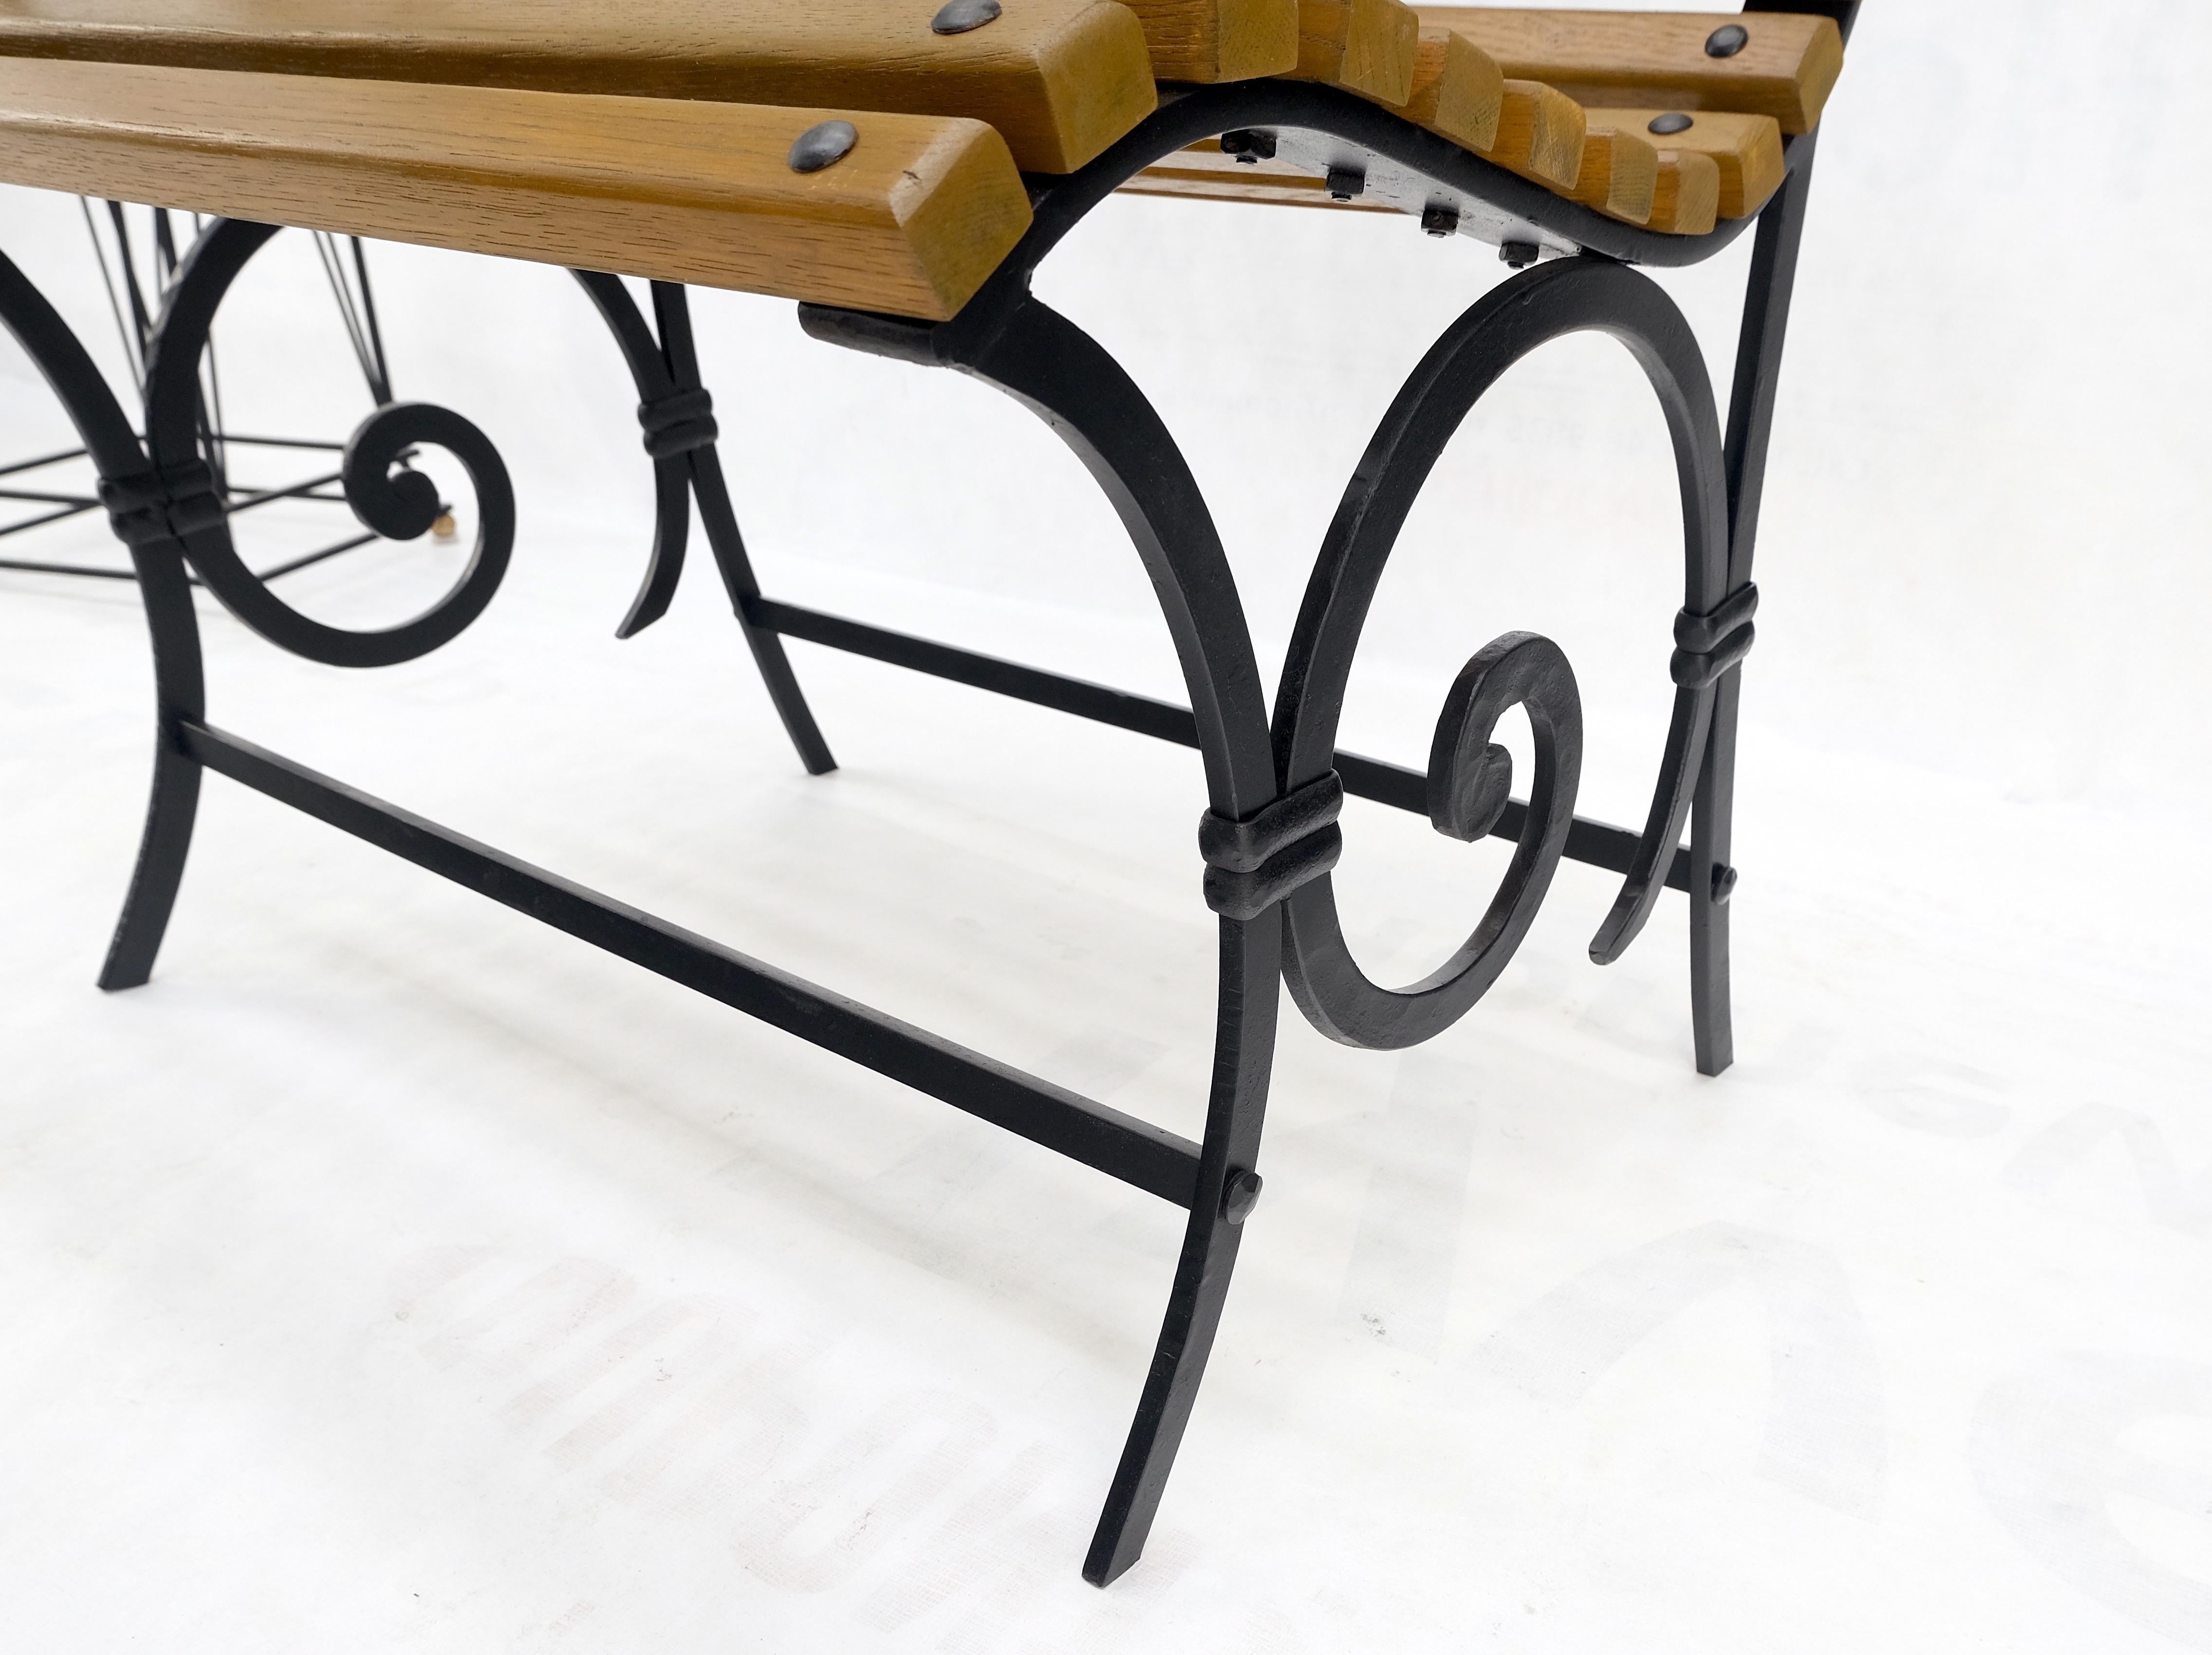 Lacquered Restored 1920s Wrought Iron & Oak Slat Park Bench Mint! For Sale